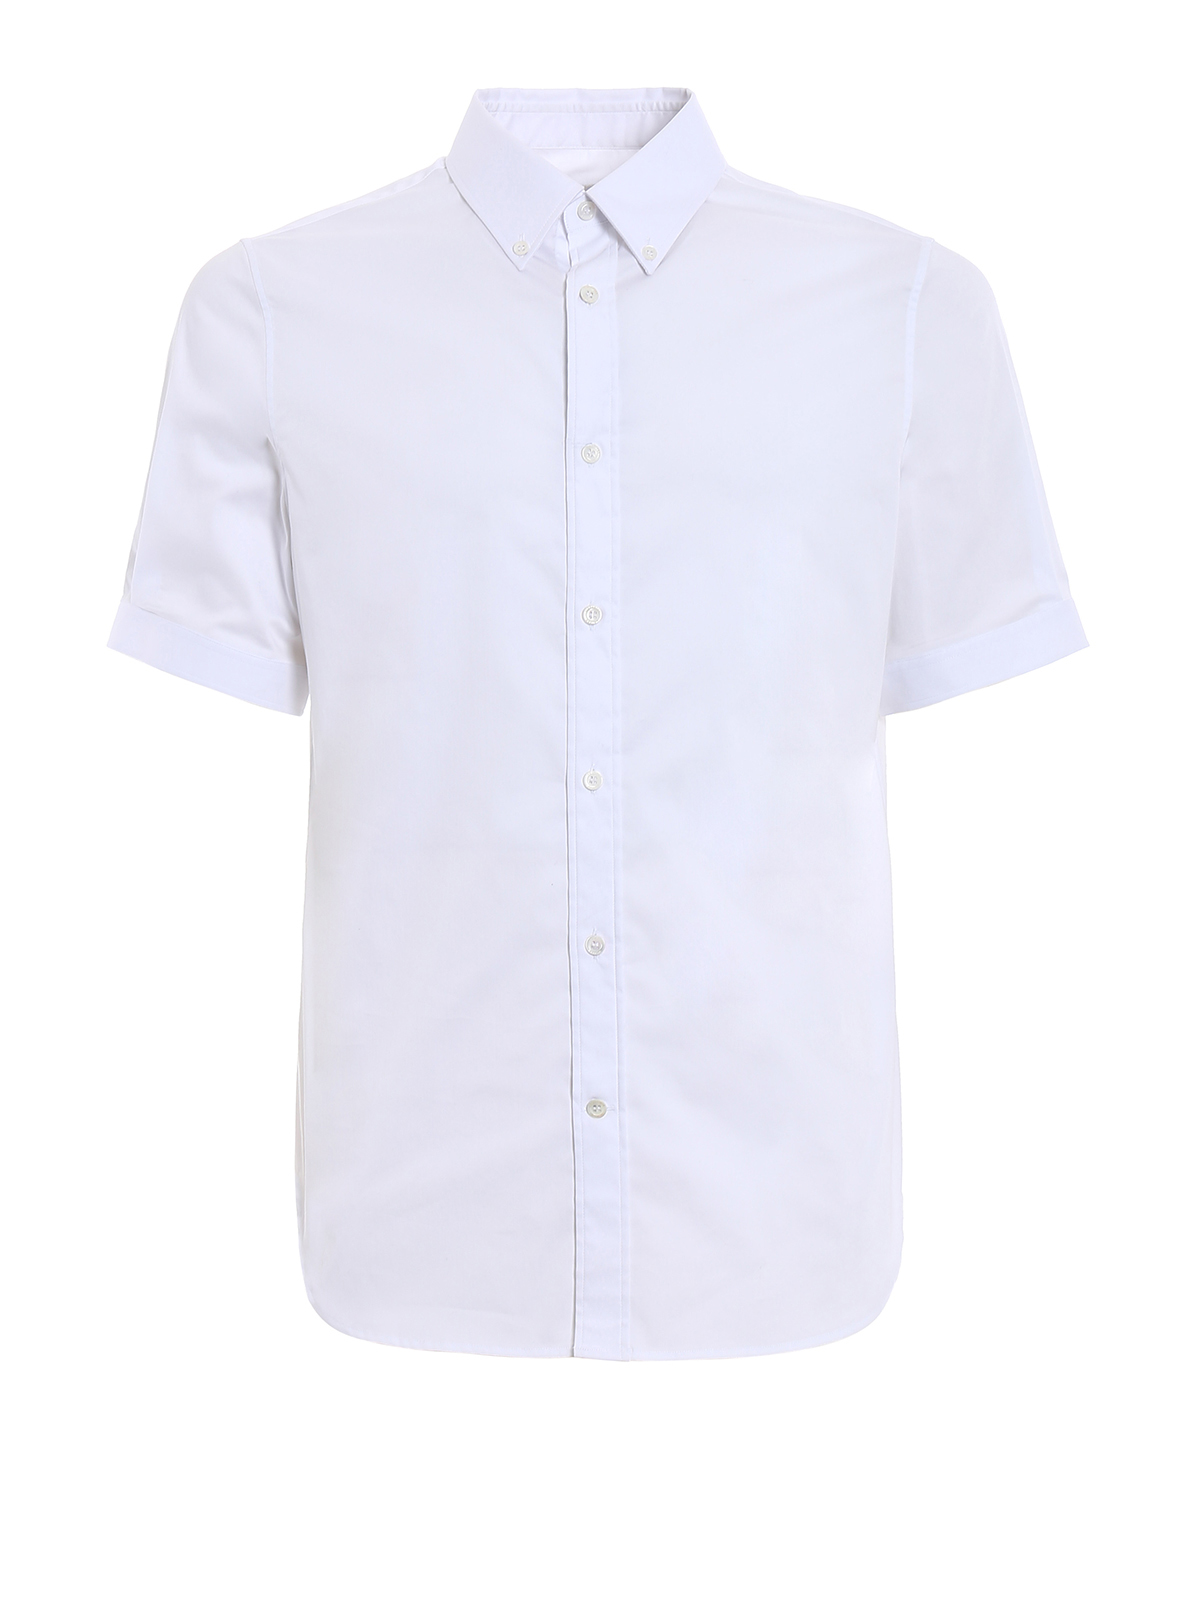 Alexander McQueen Short-sleeve Cotton Shirt in White for Men Mens Clothing Shirts Formal shirts 